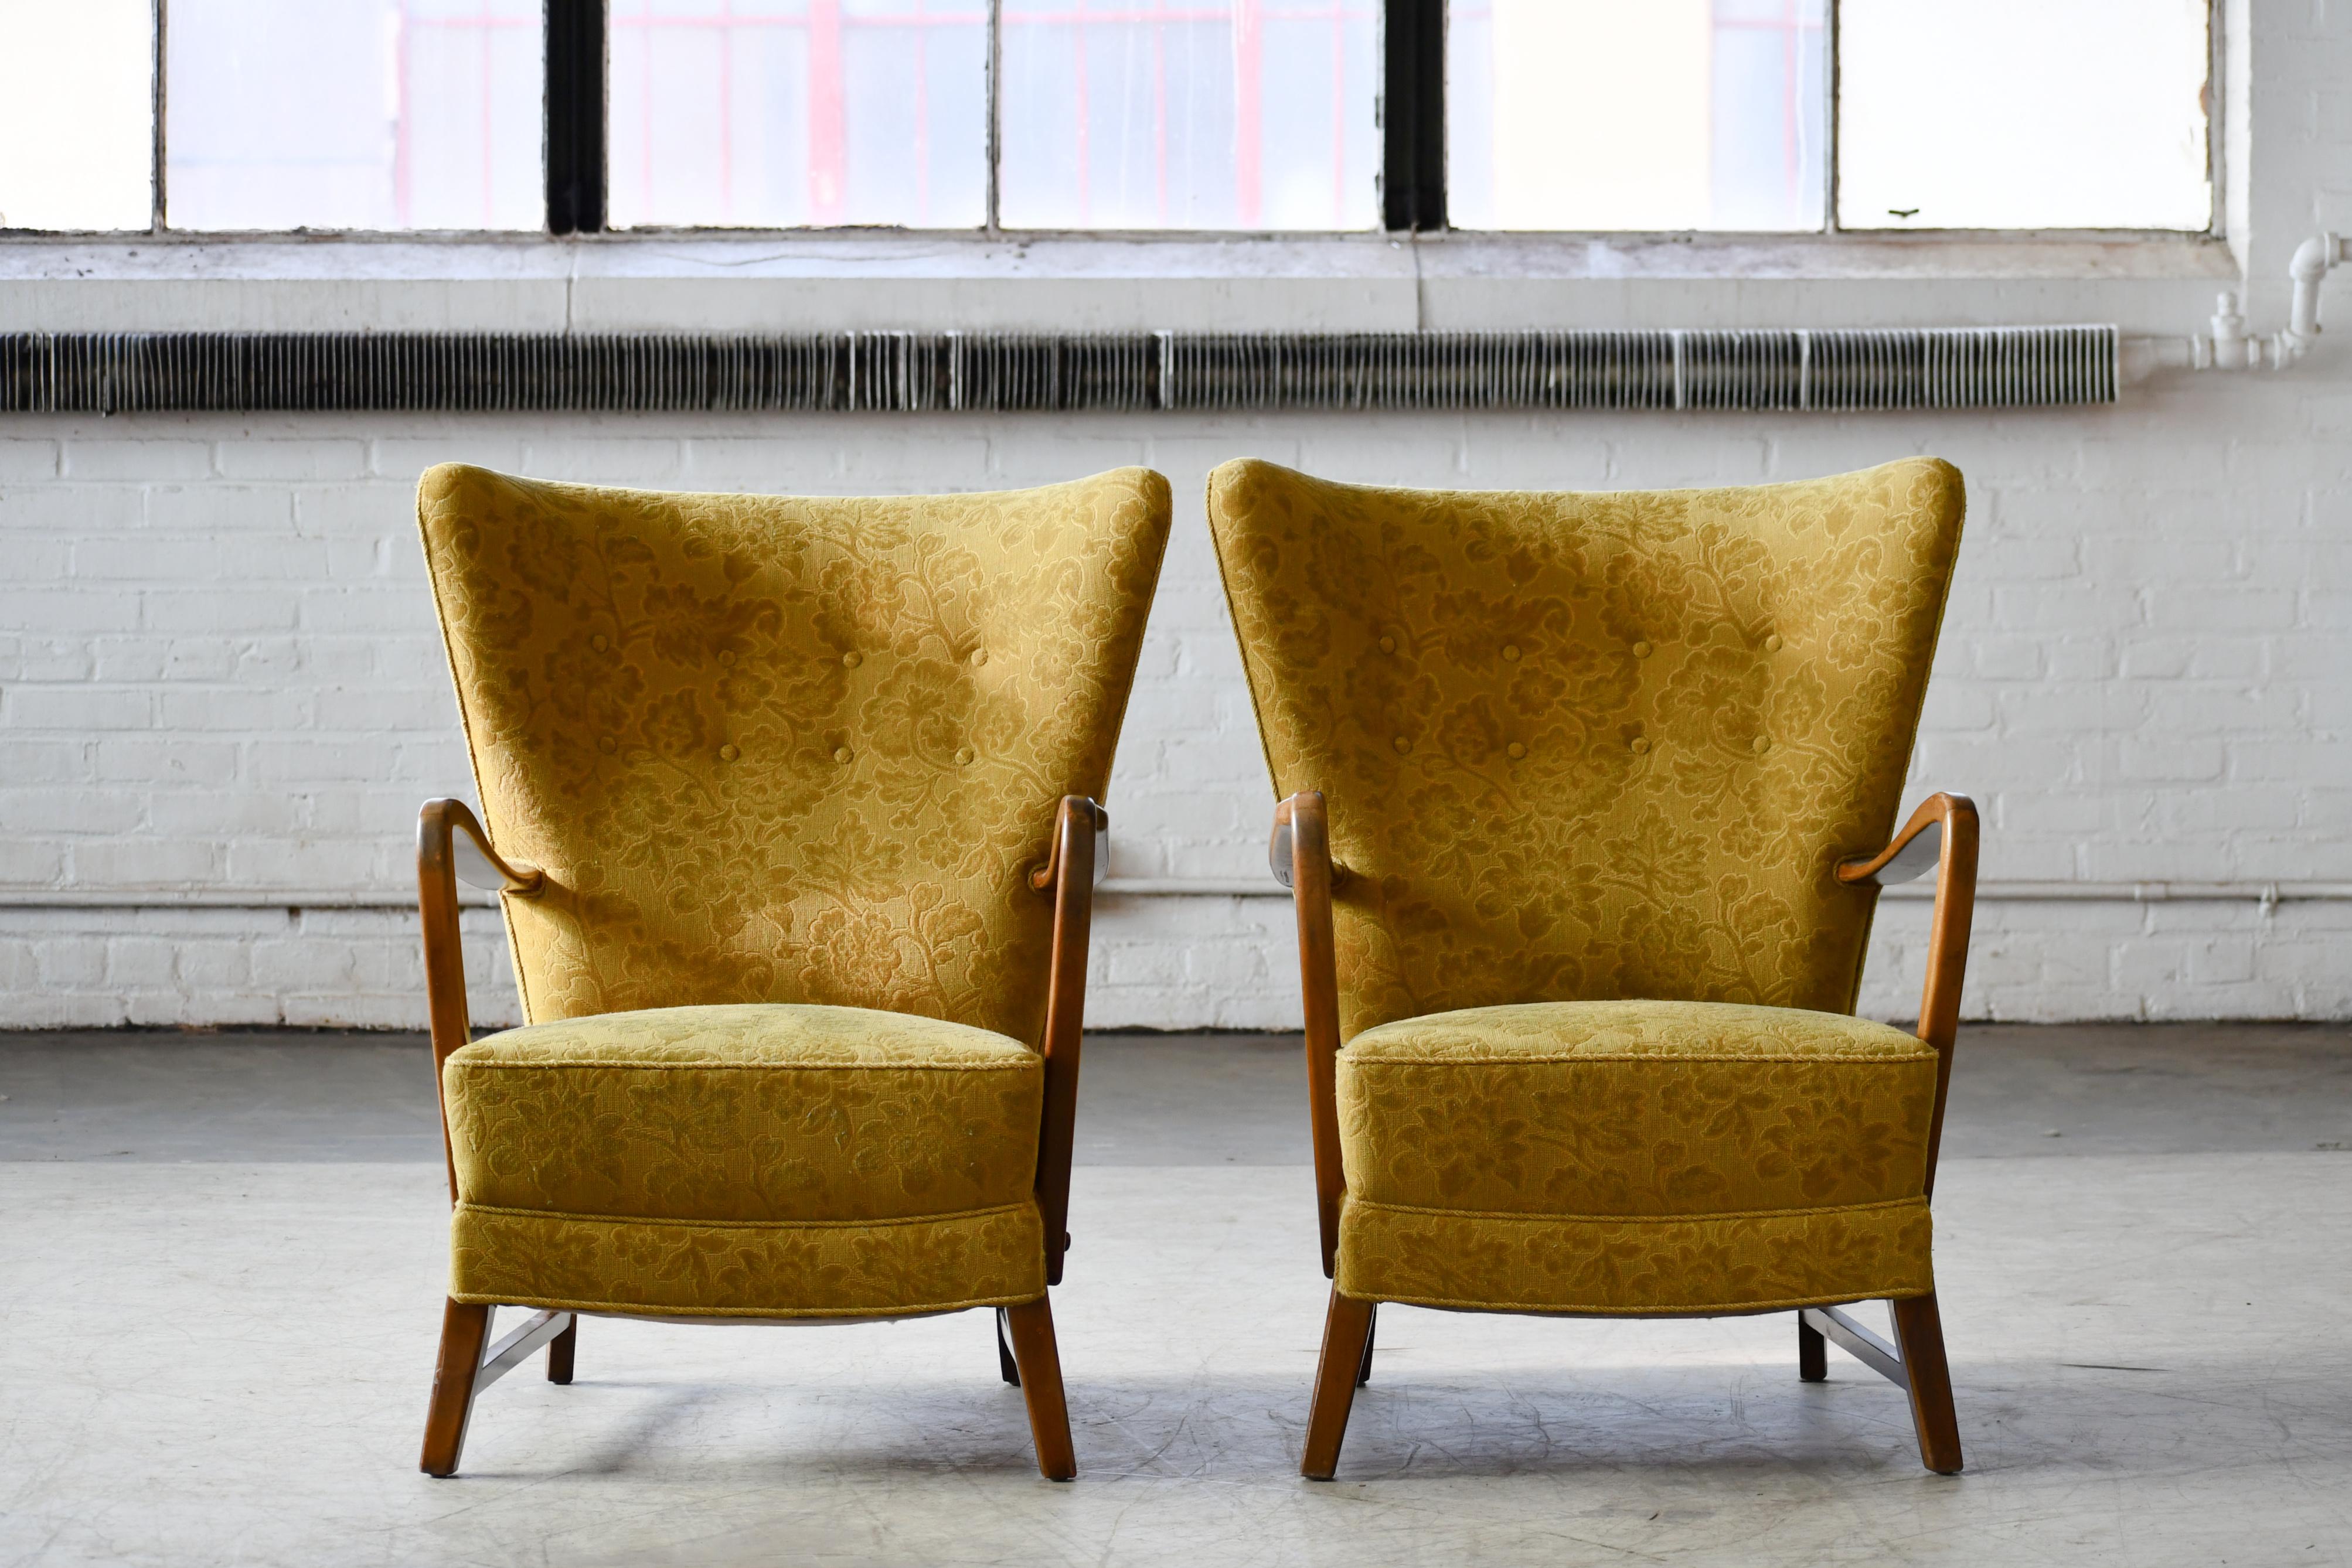 Classic Danish very comfortable high back armchair from the 1940s in the style of Fritz Hansen and Alfred Christensen with open armrests in beautifully curved stained beech. Nice slim elegant silhouette. Solid and sturdy construction with the fabric